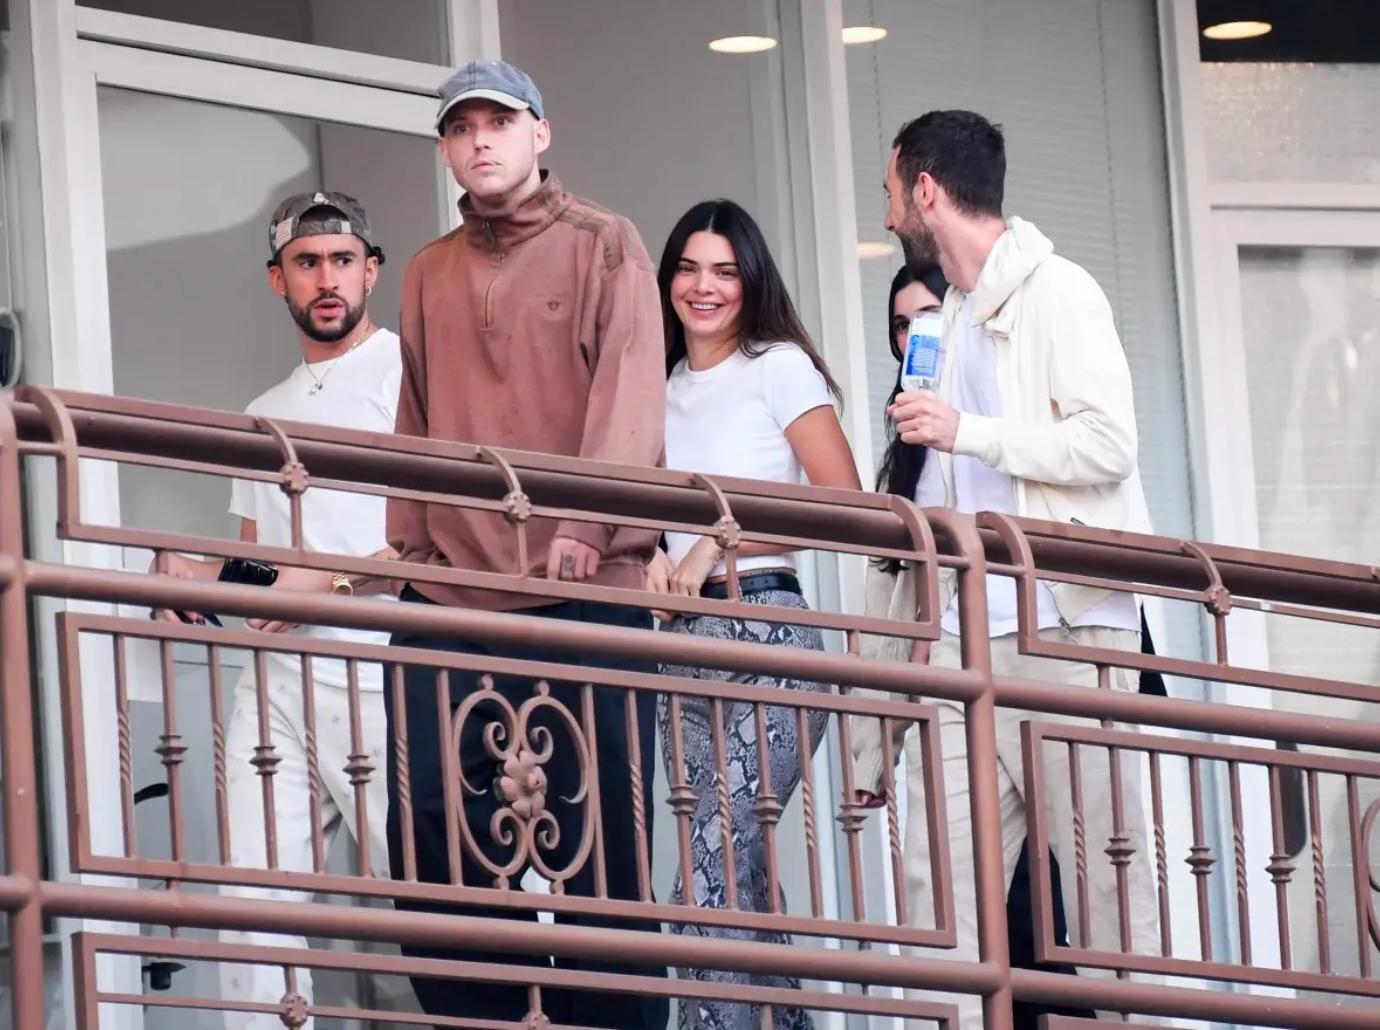 Kendall Jenner and her 'humiliating' gesture to Bad Bunny at Lakers game